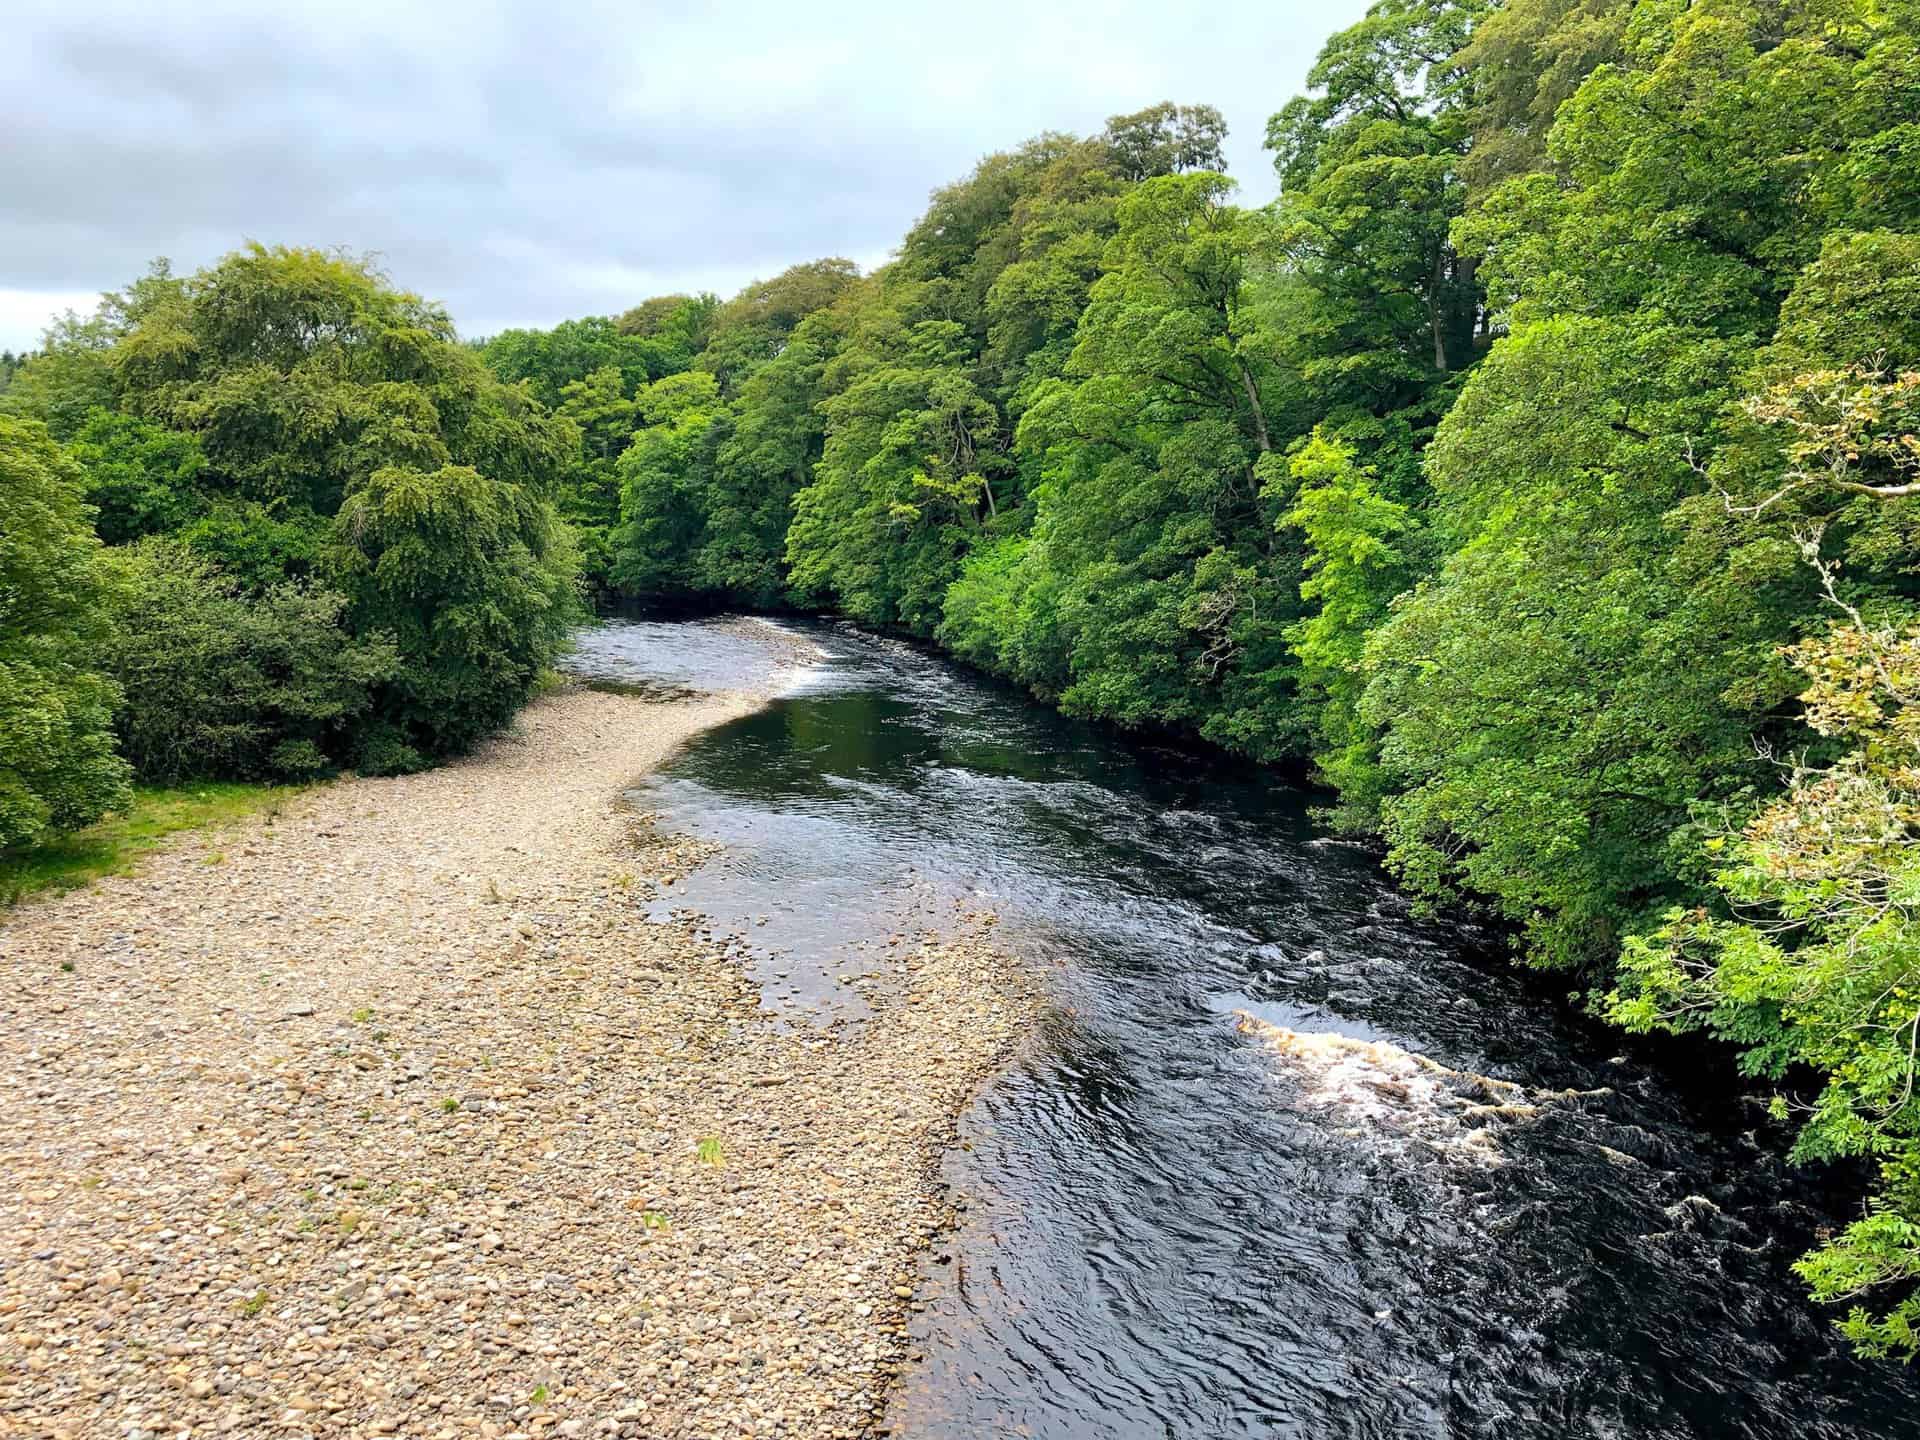 The River Tees as observed from Eggleston Bridge, highlighting the area's natural splendour.